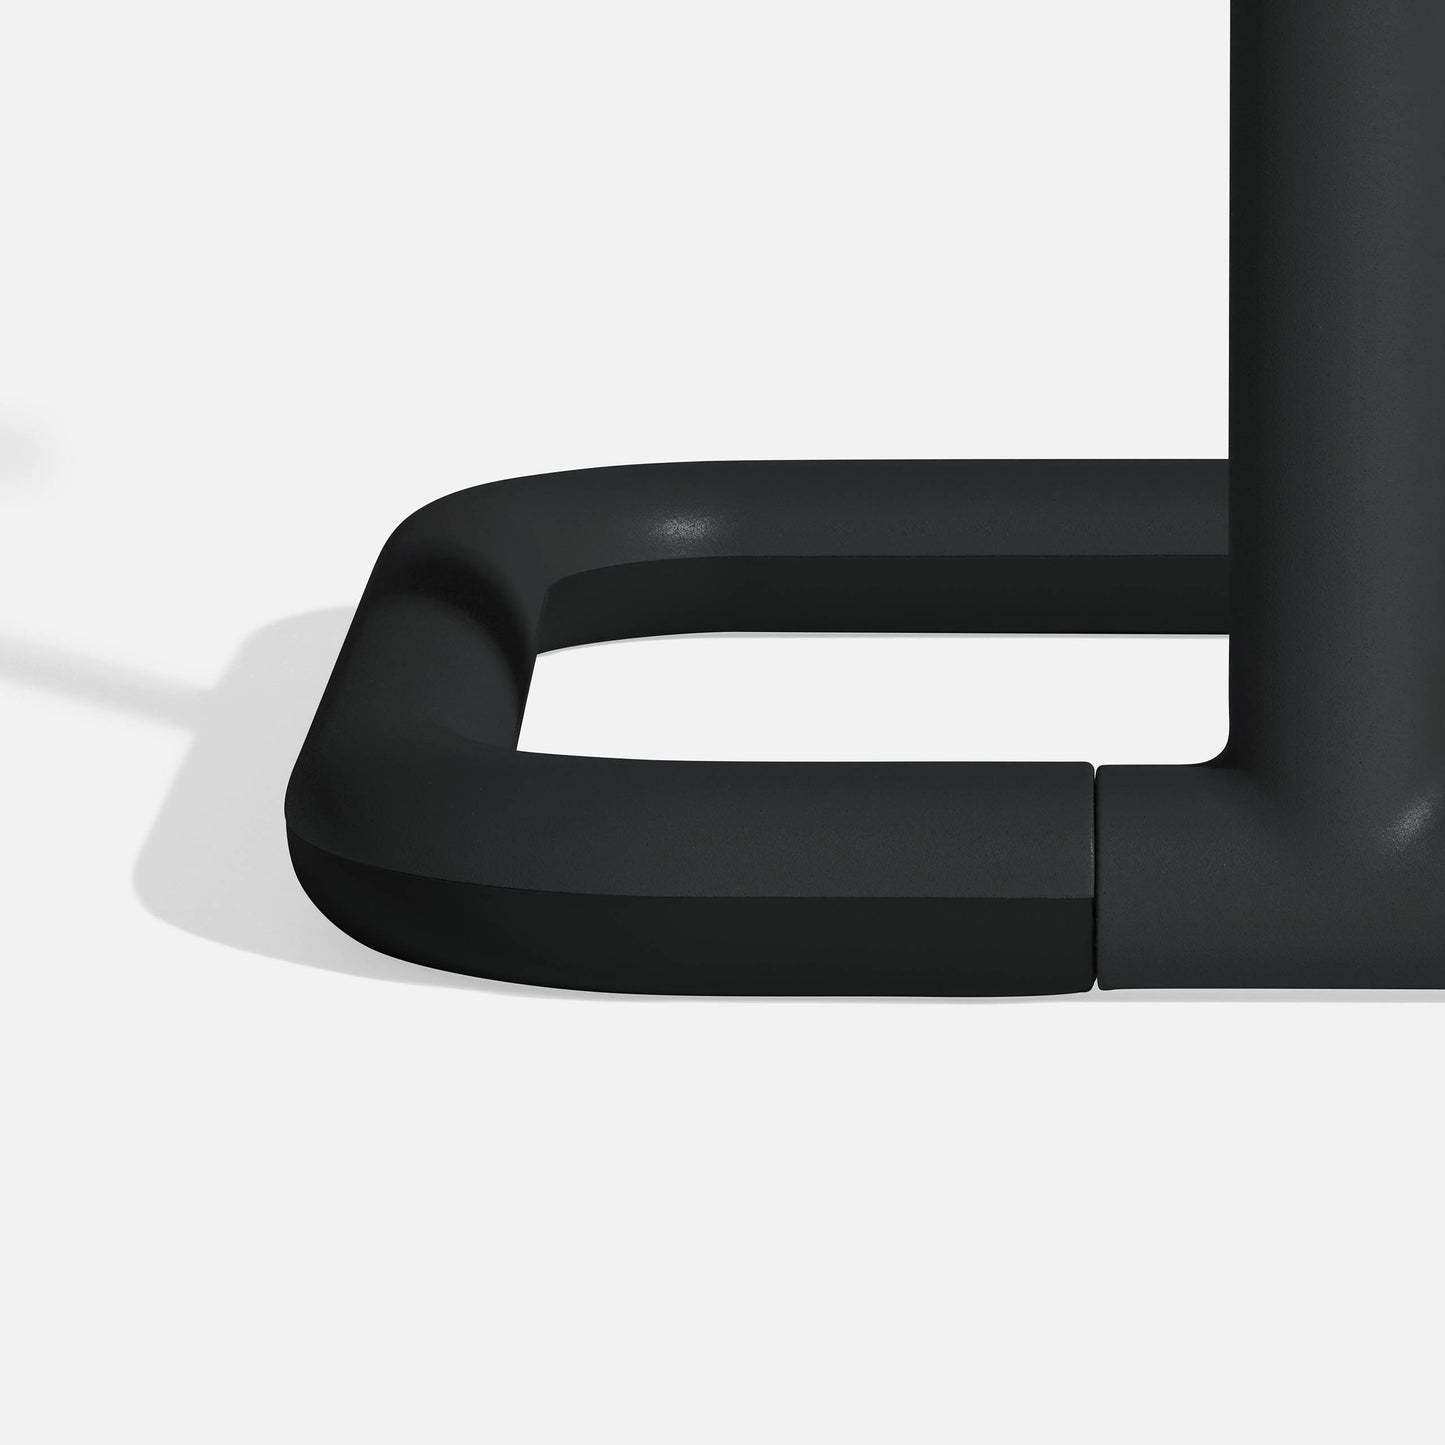 Adjustable tablet stand in black - Bouncepad Go